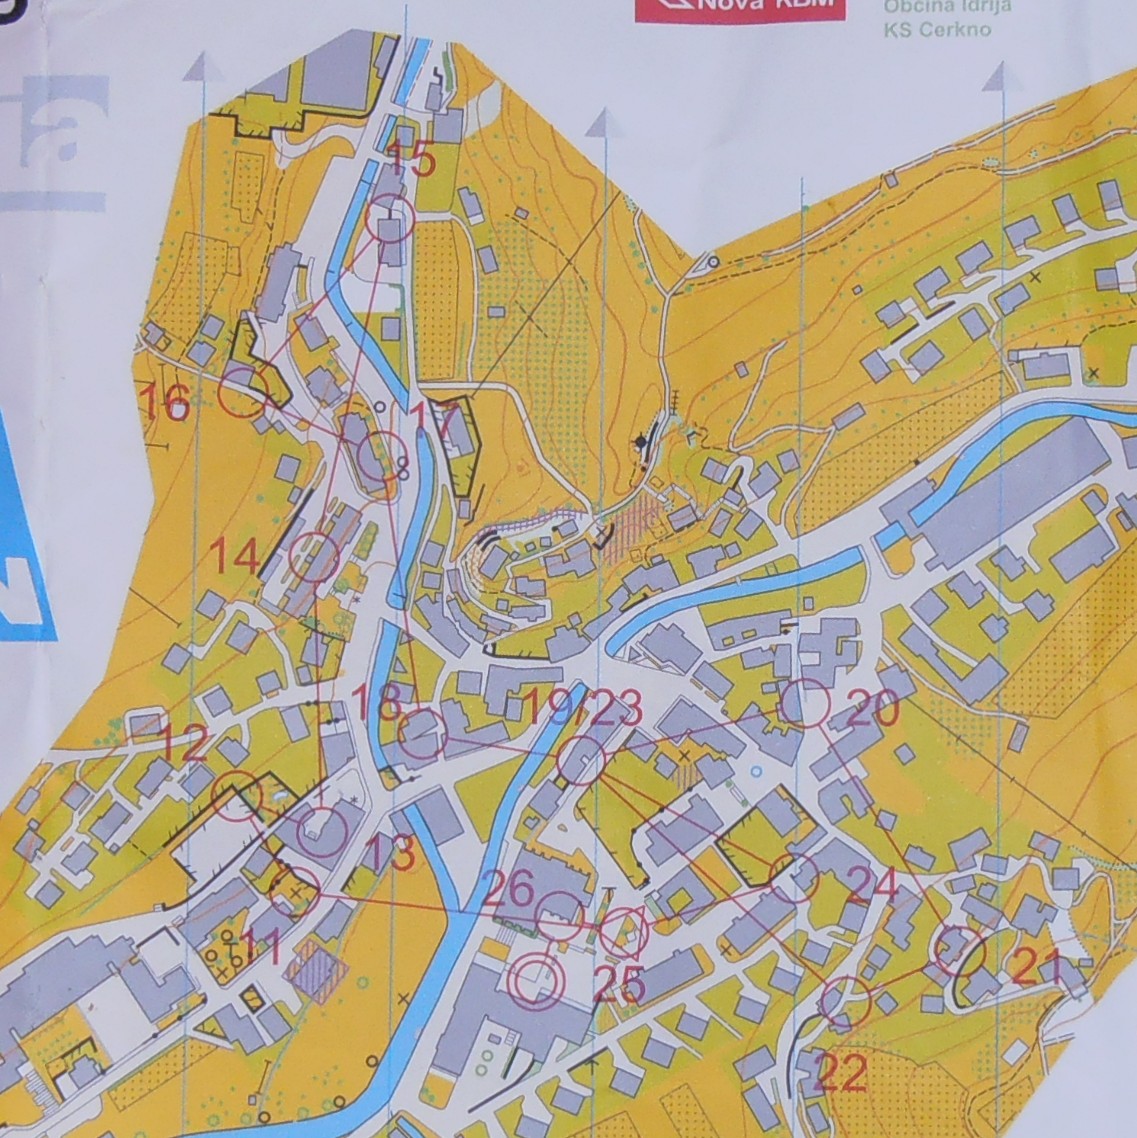 Cerkno Cup Sprint Map2 (2012-08-18)